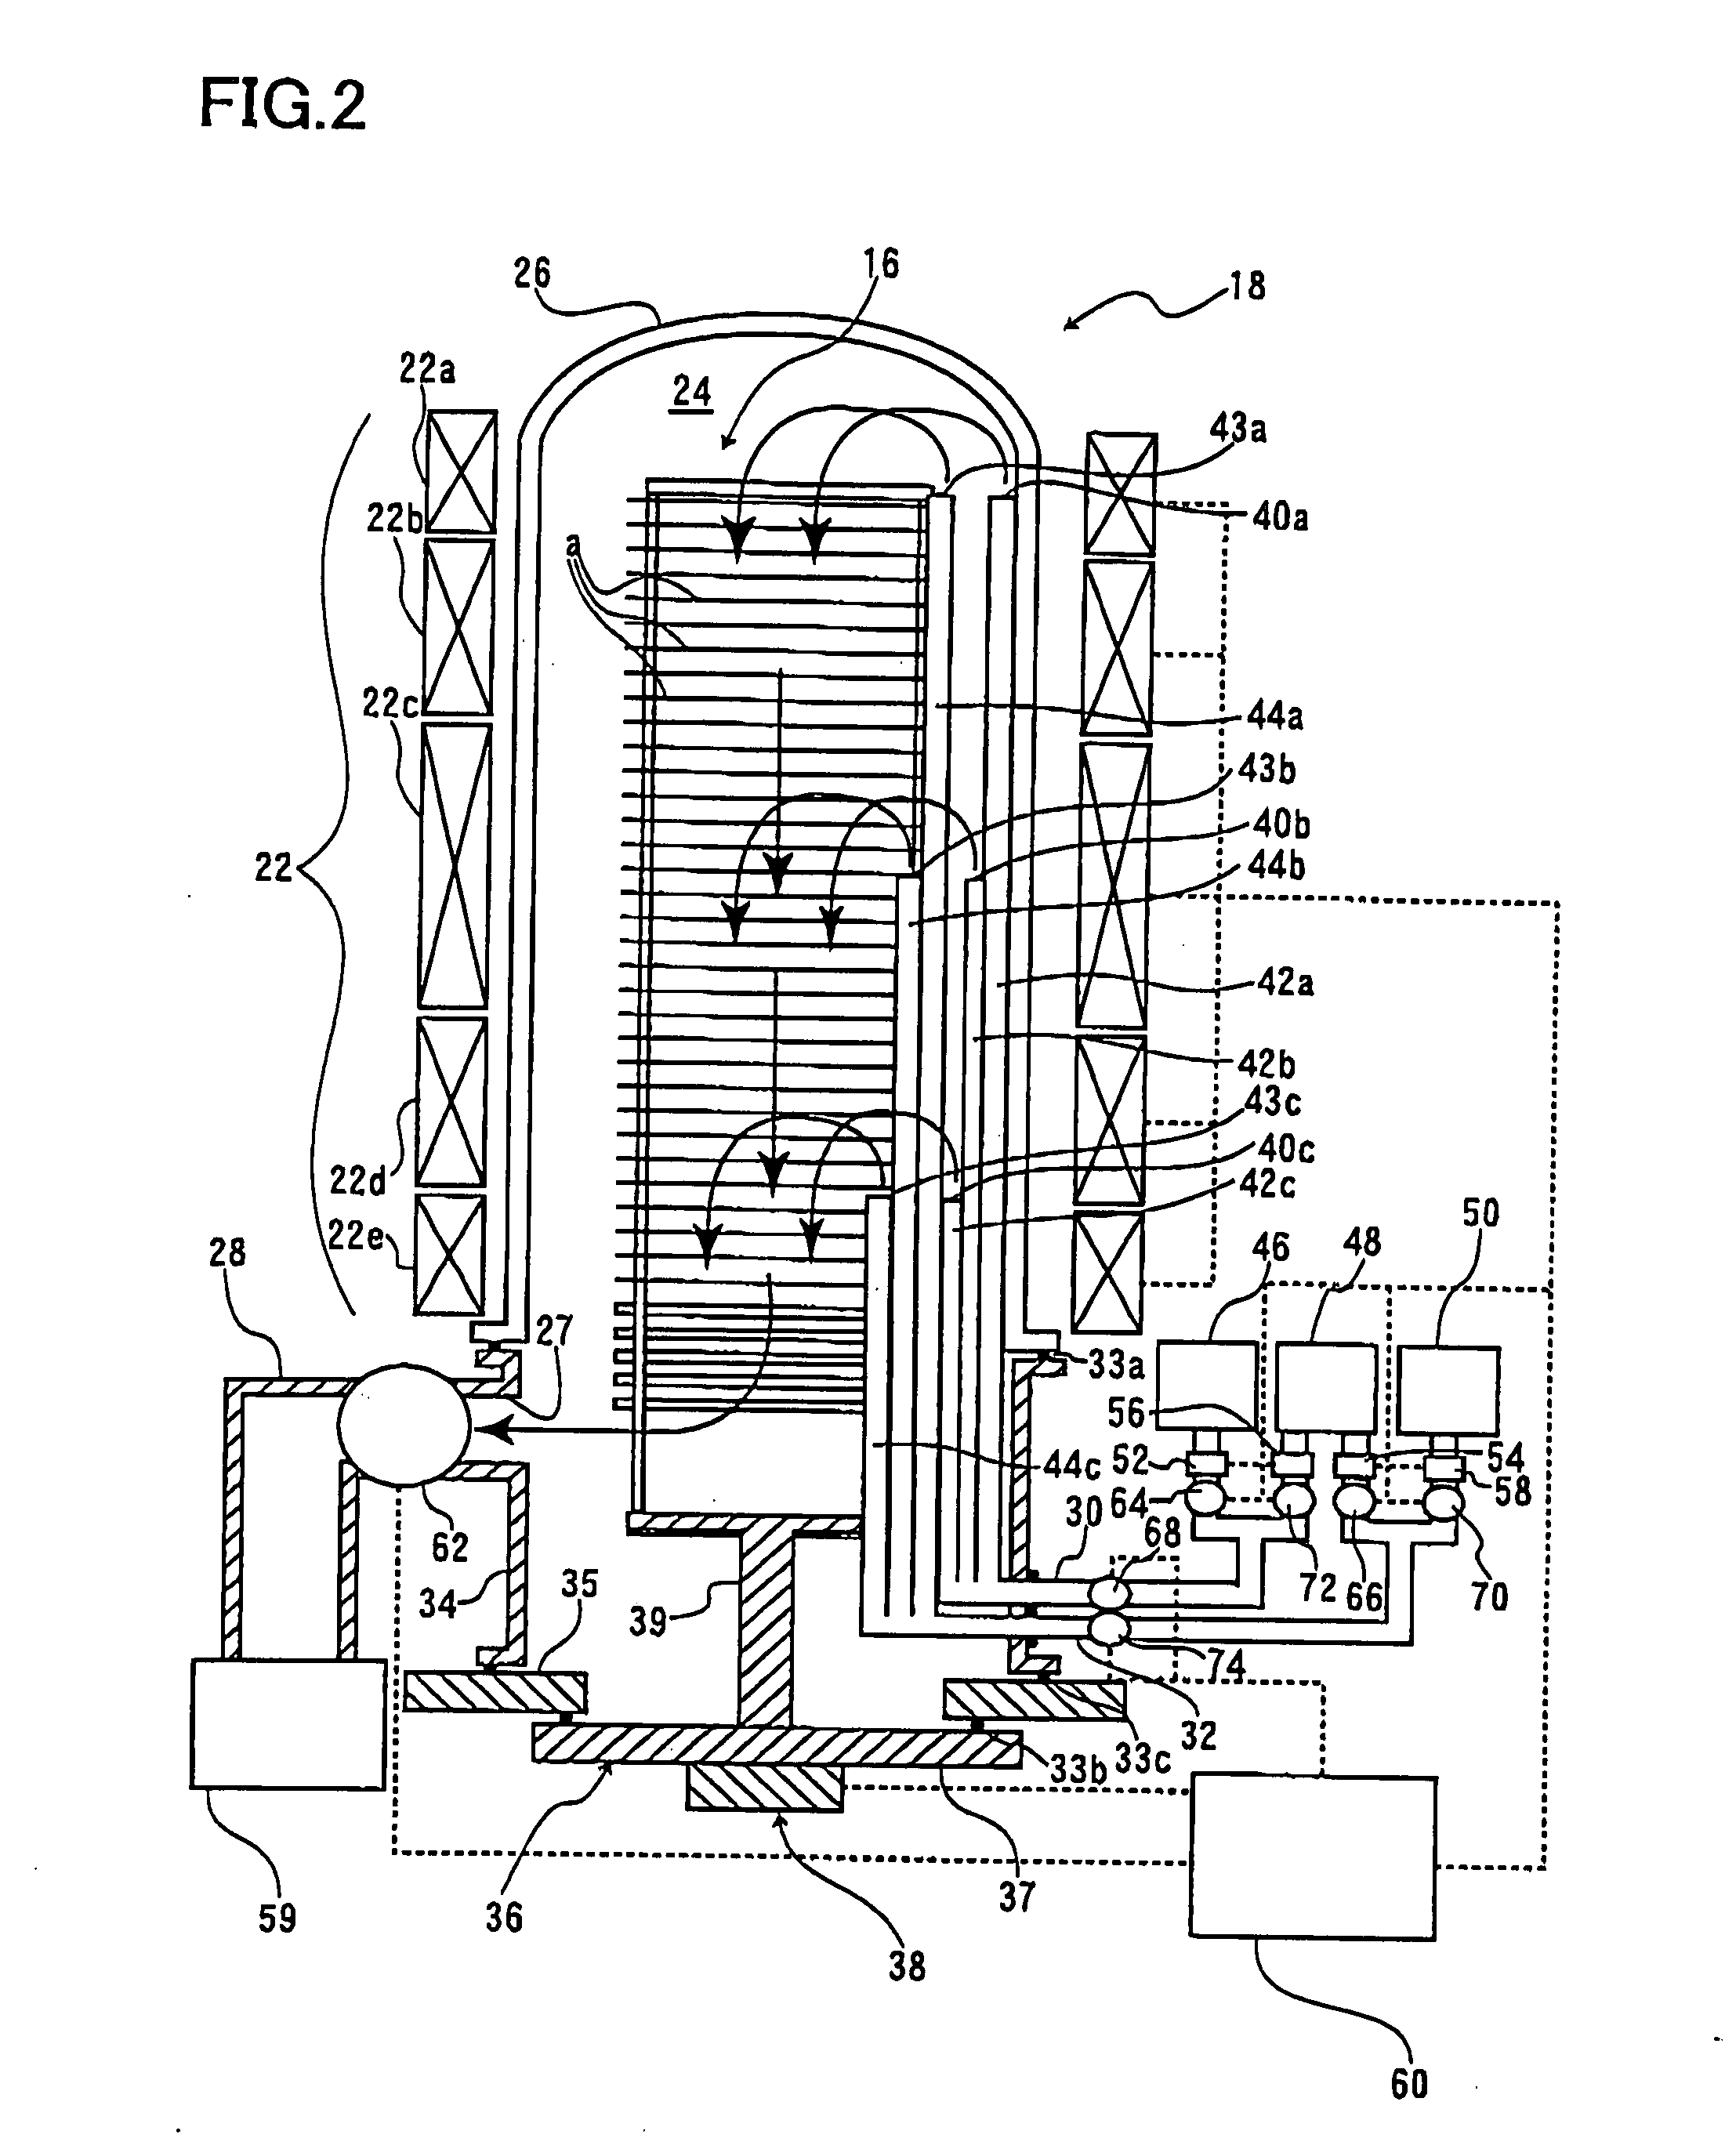 Substrate treatment device